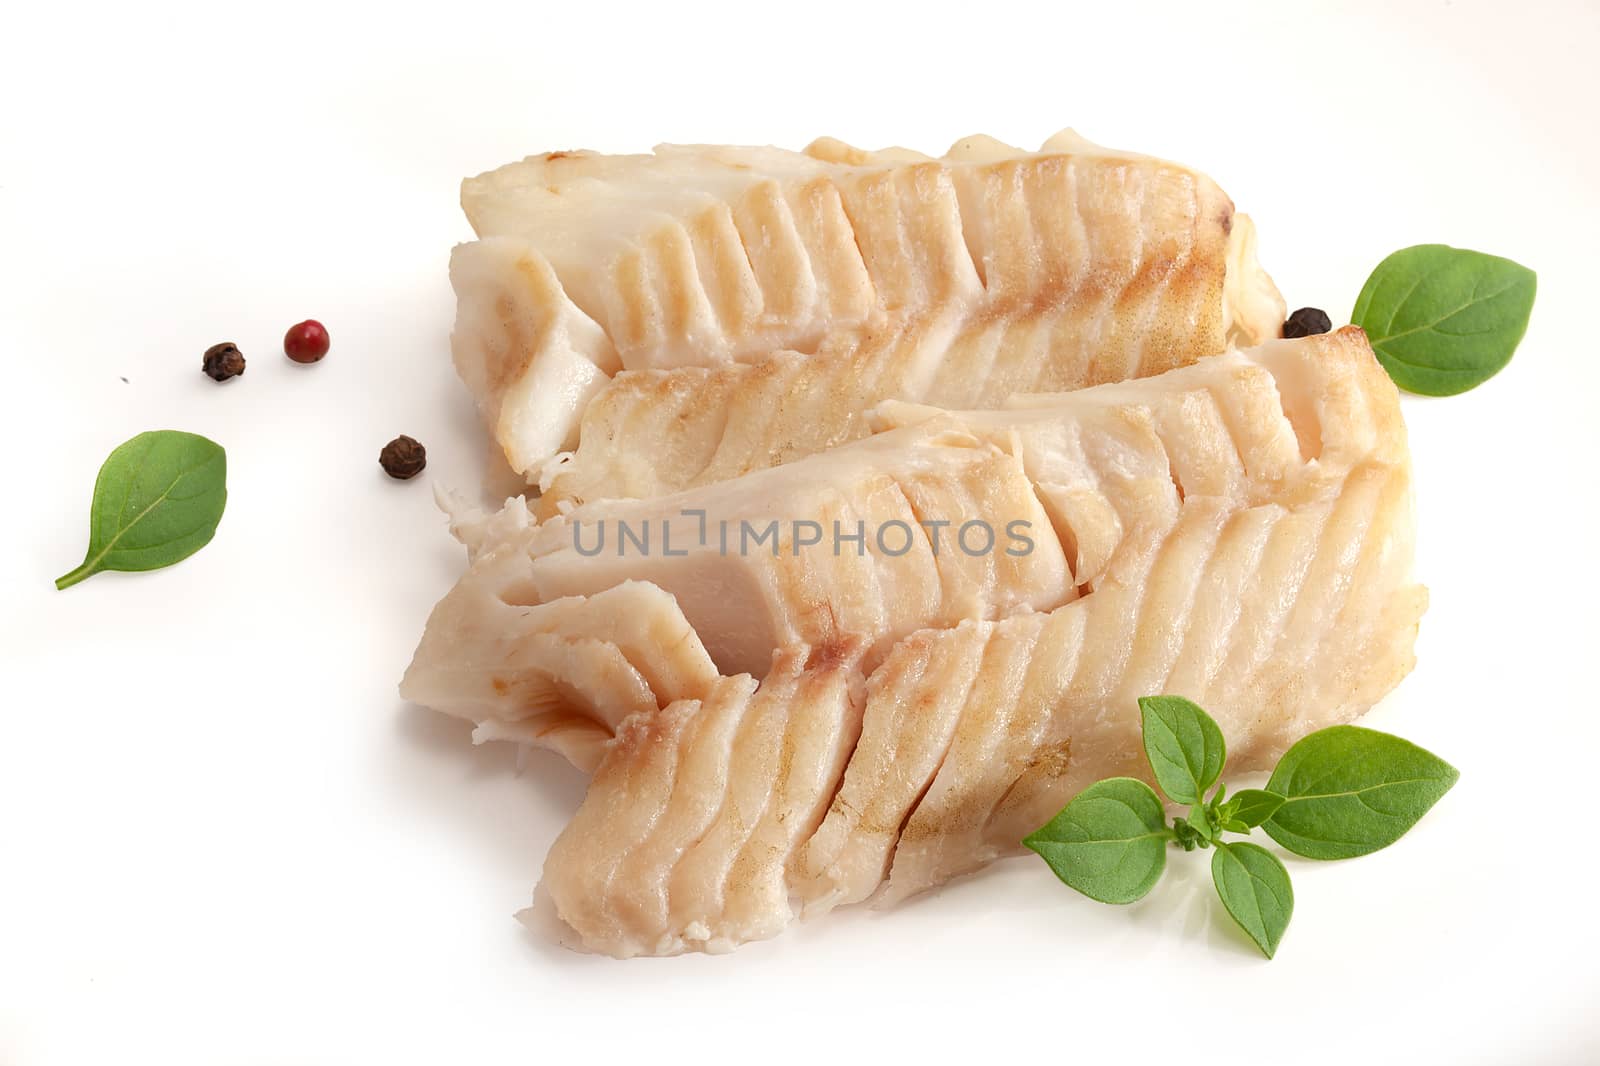 Baked cod loin with basil by Angorius